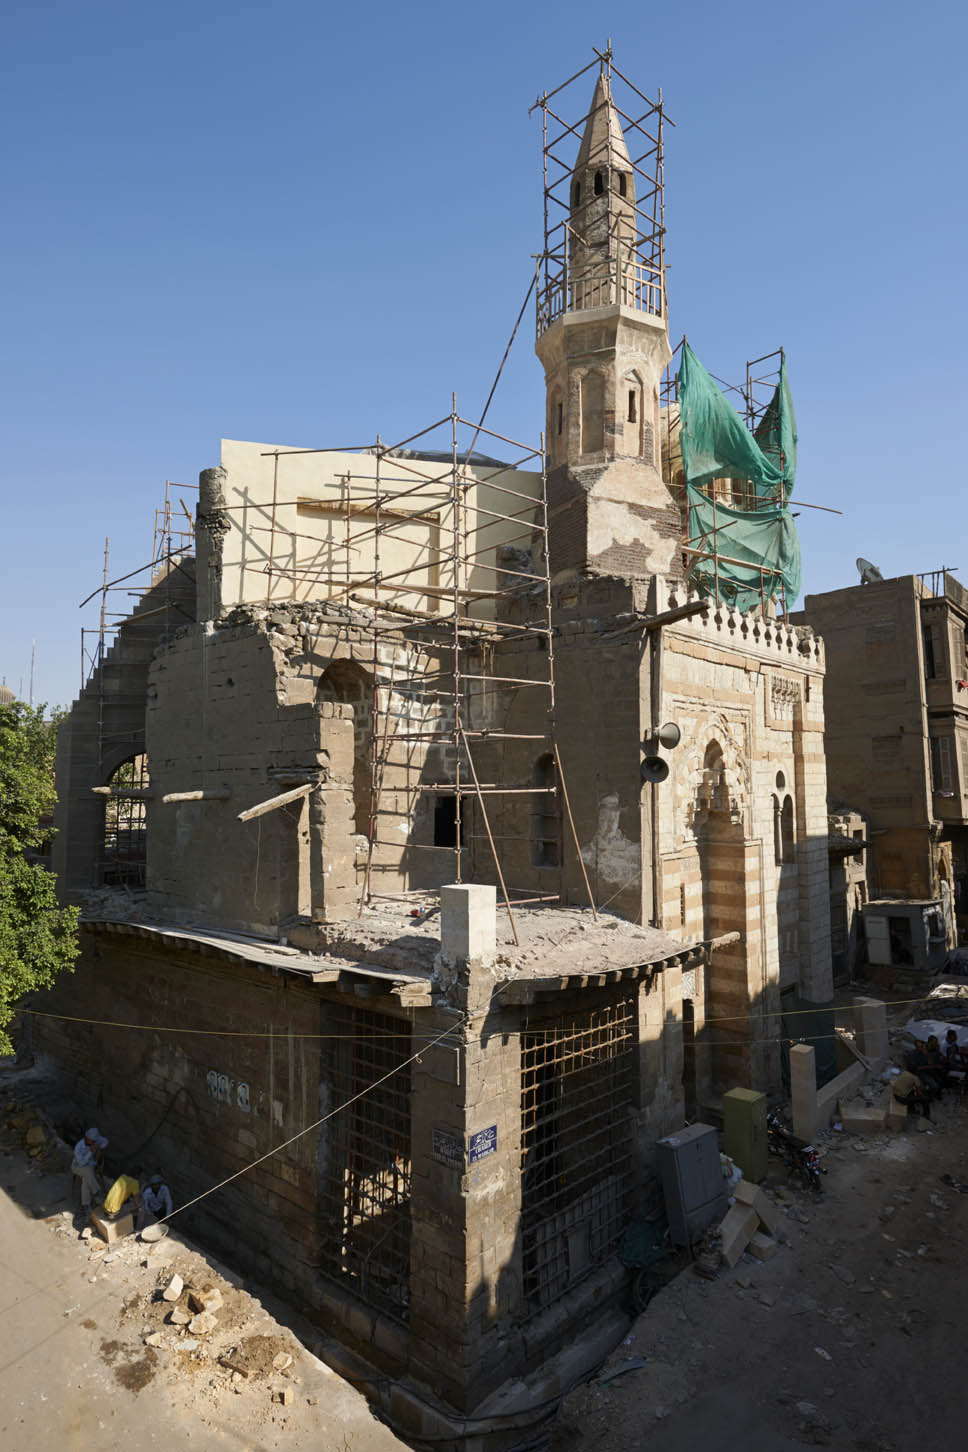 General exterior view, with scaffolding